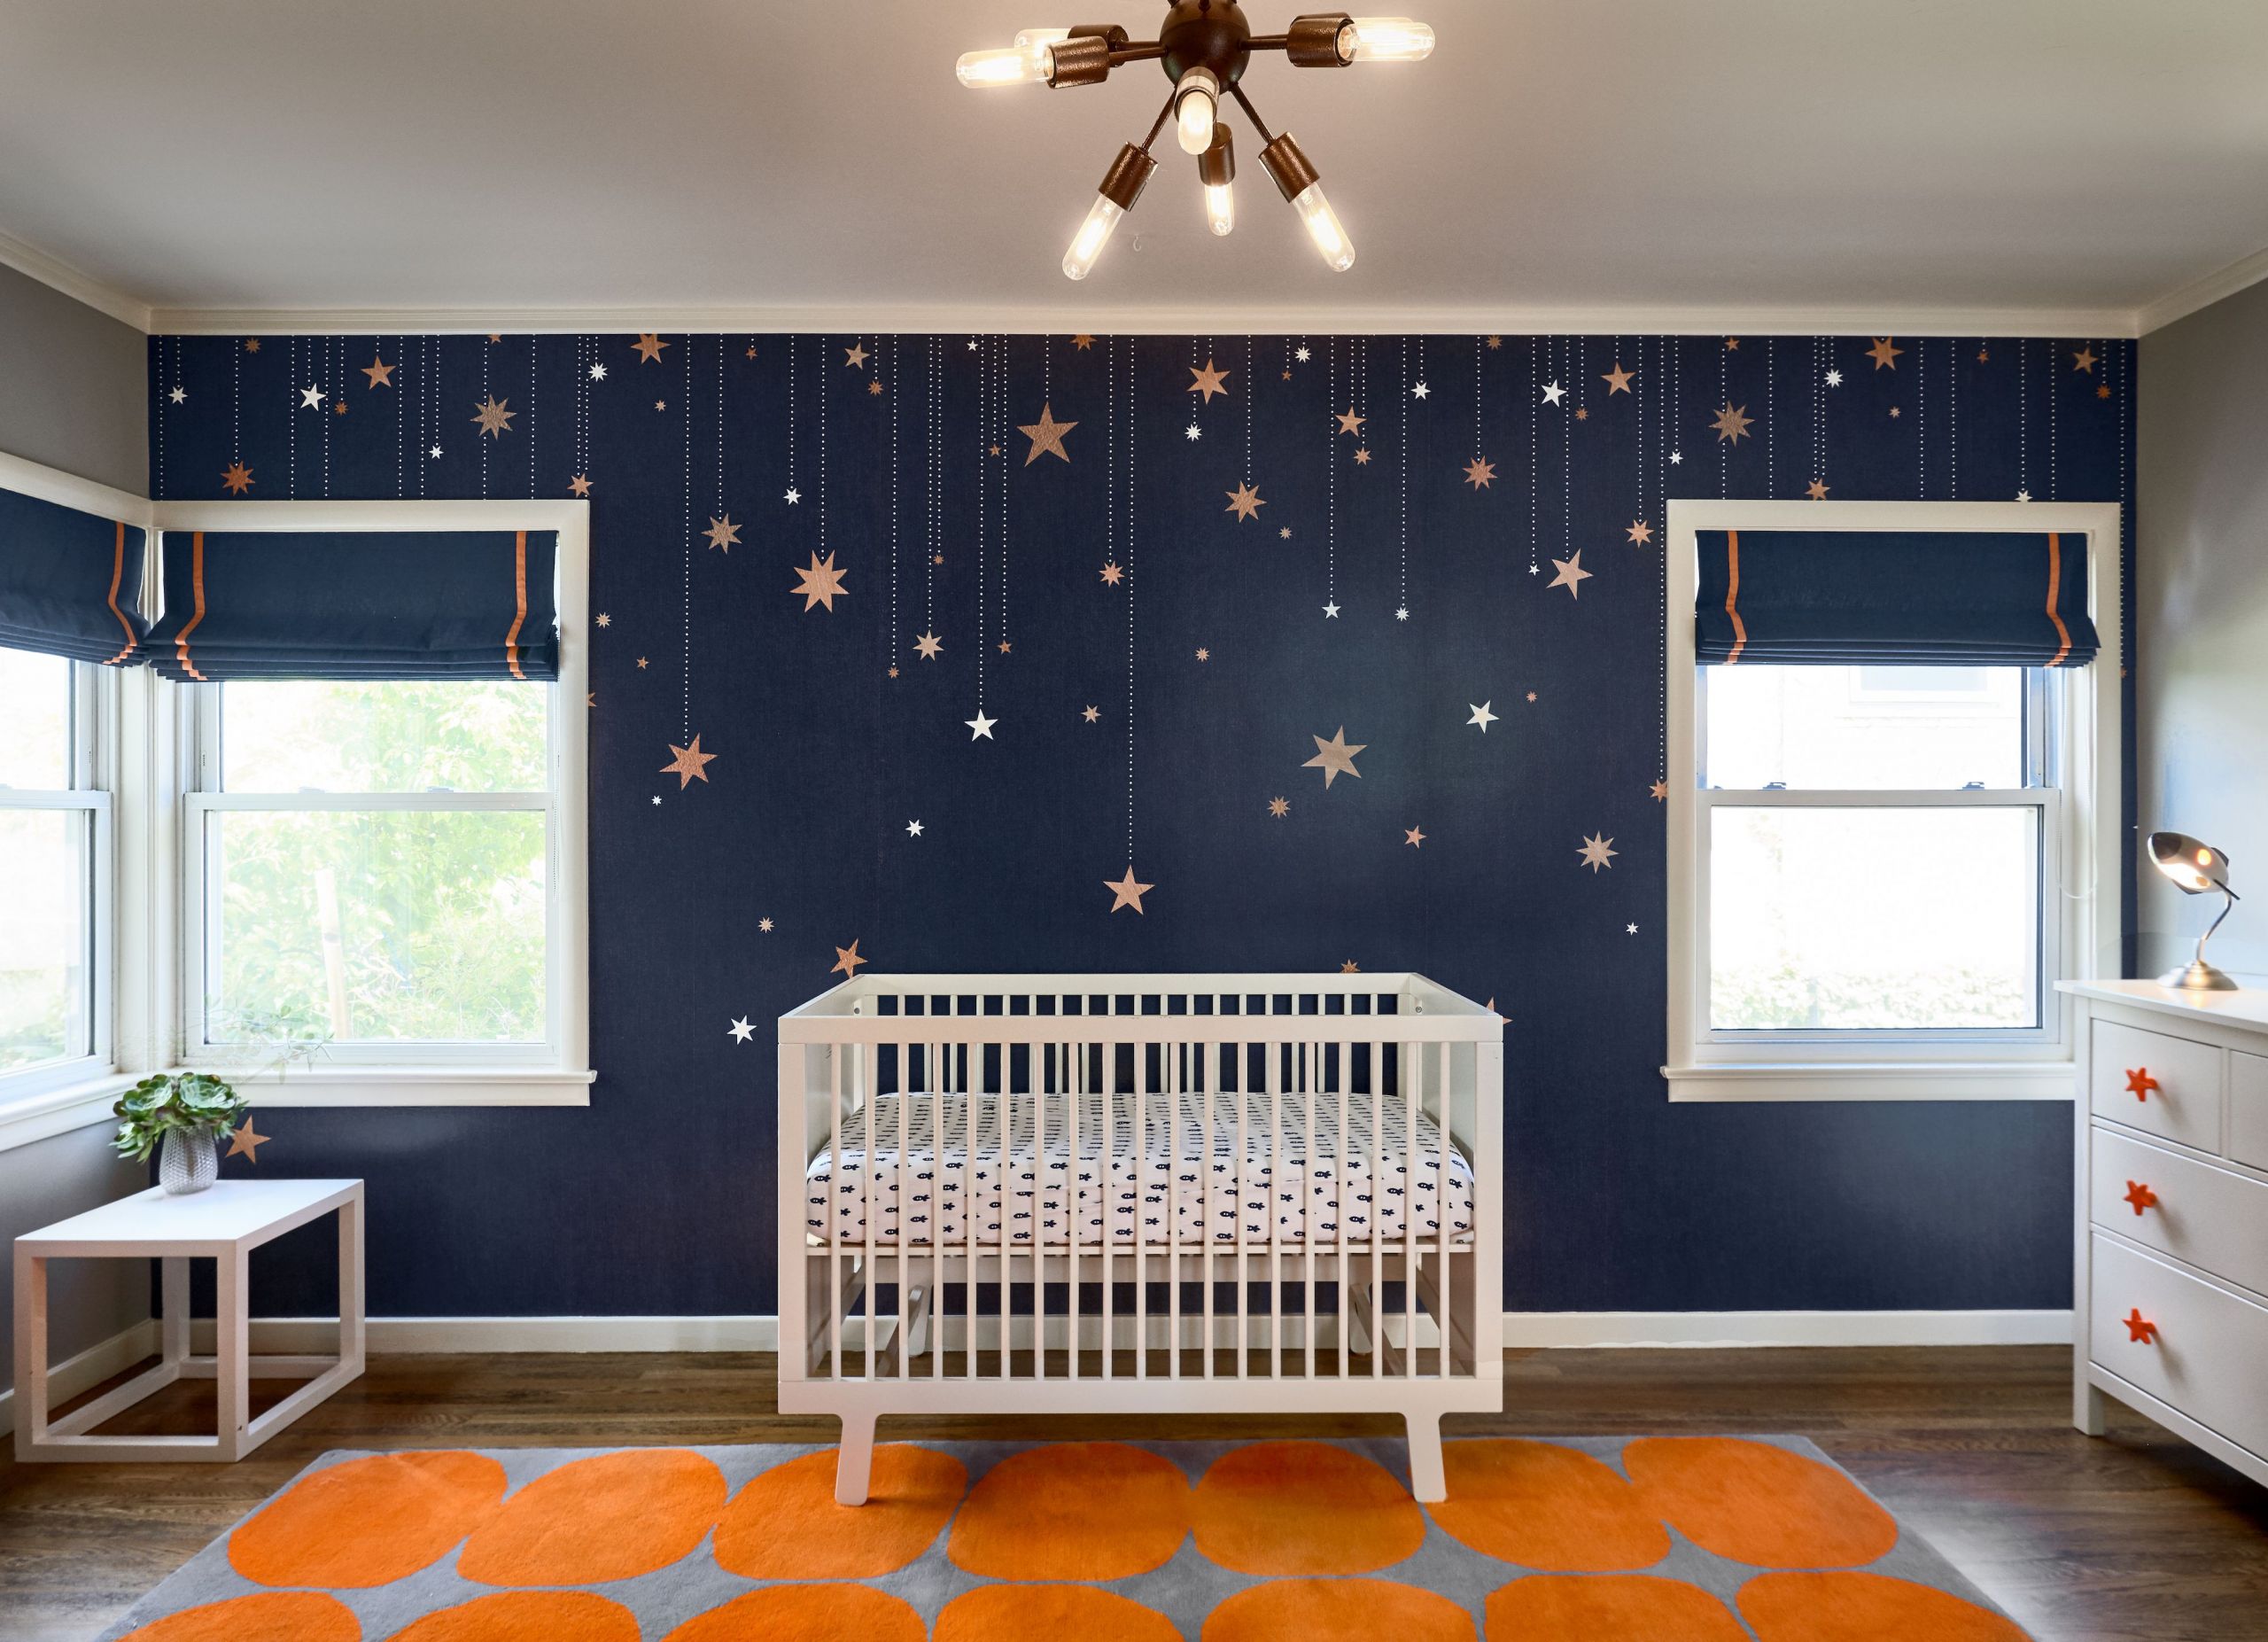 Stars For Kids Room
 18 Space Themed Rooms for Kids